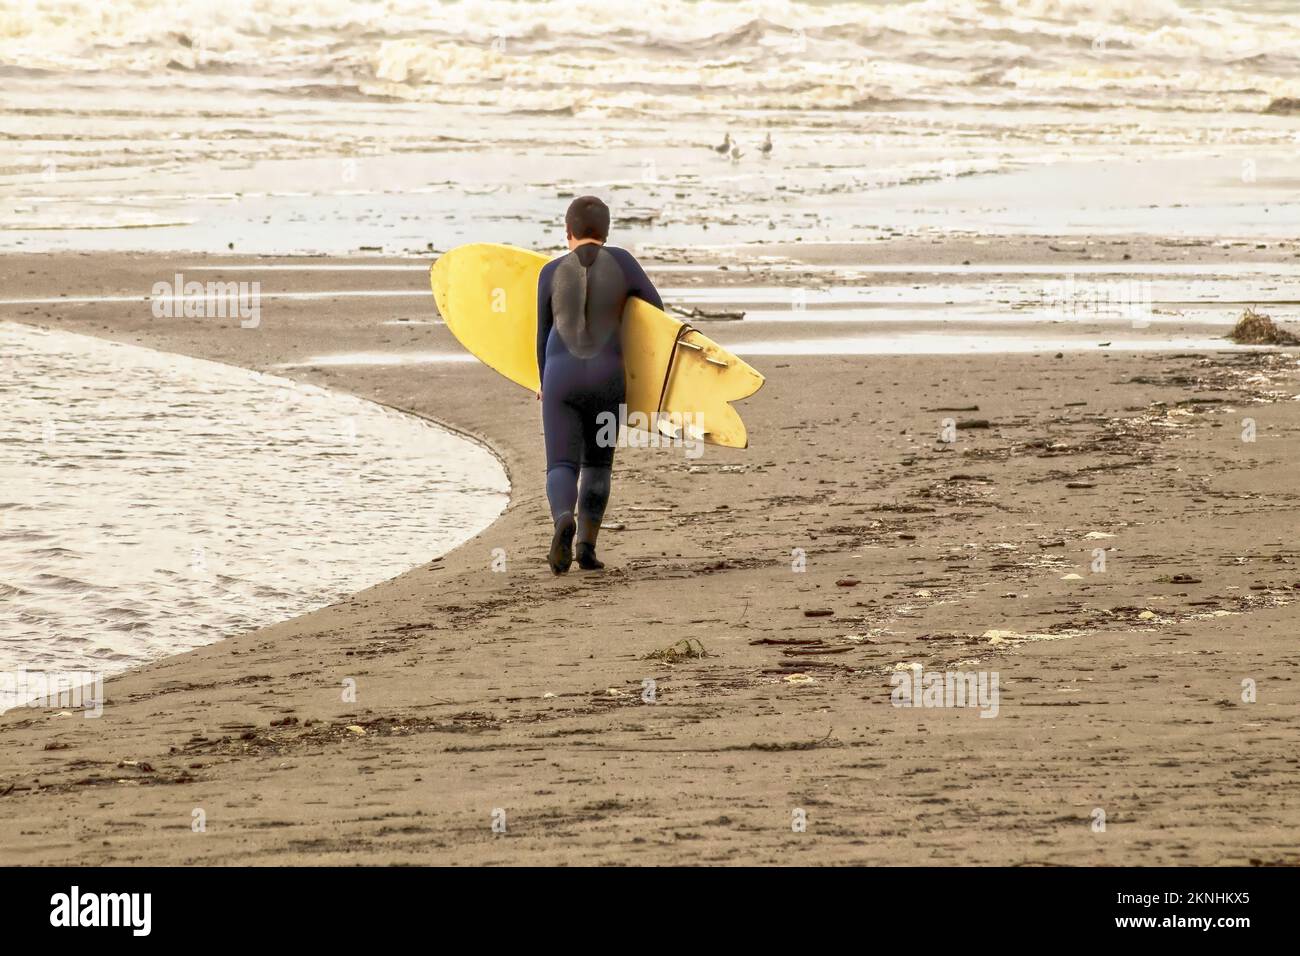 Young boy walking toward ocean with wetsuit and yellow surfboard - almost monochromatic in browns and ochers Stock Photo